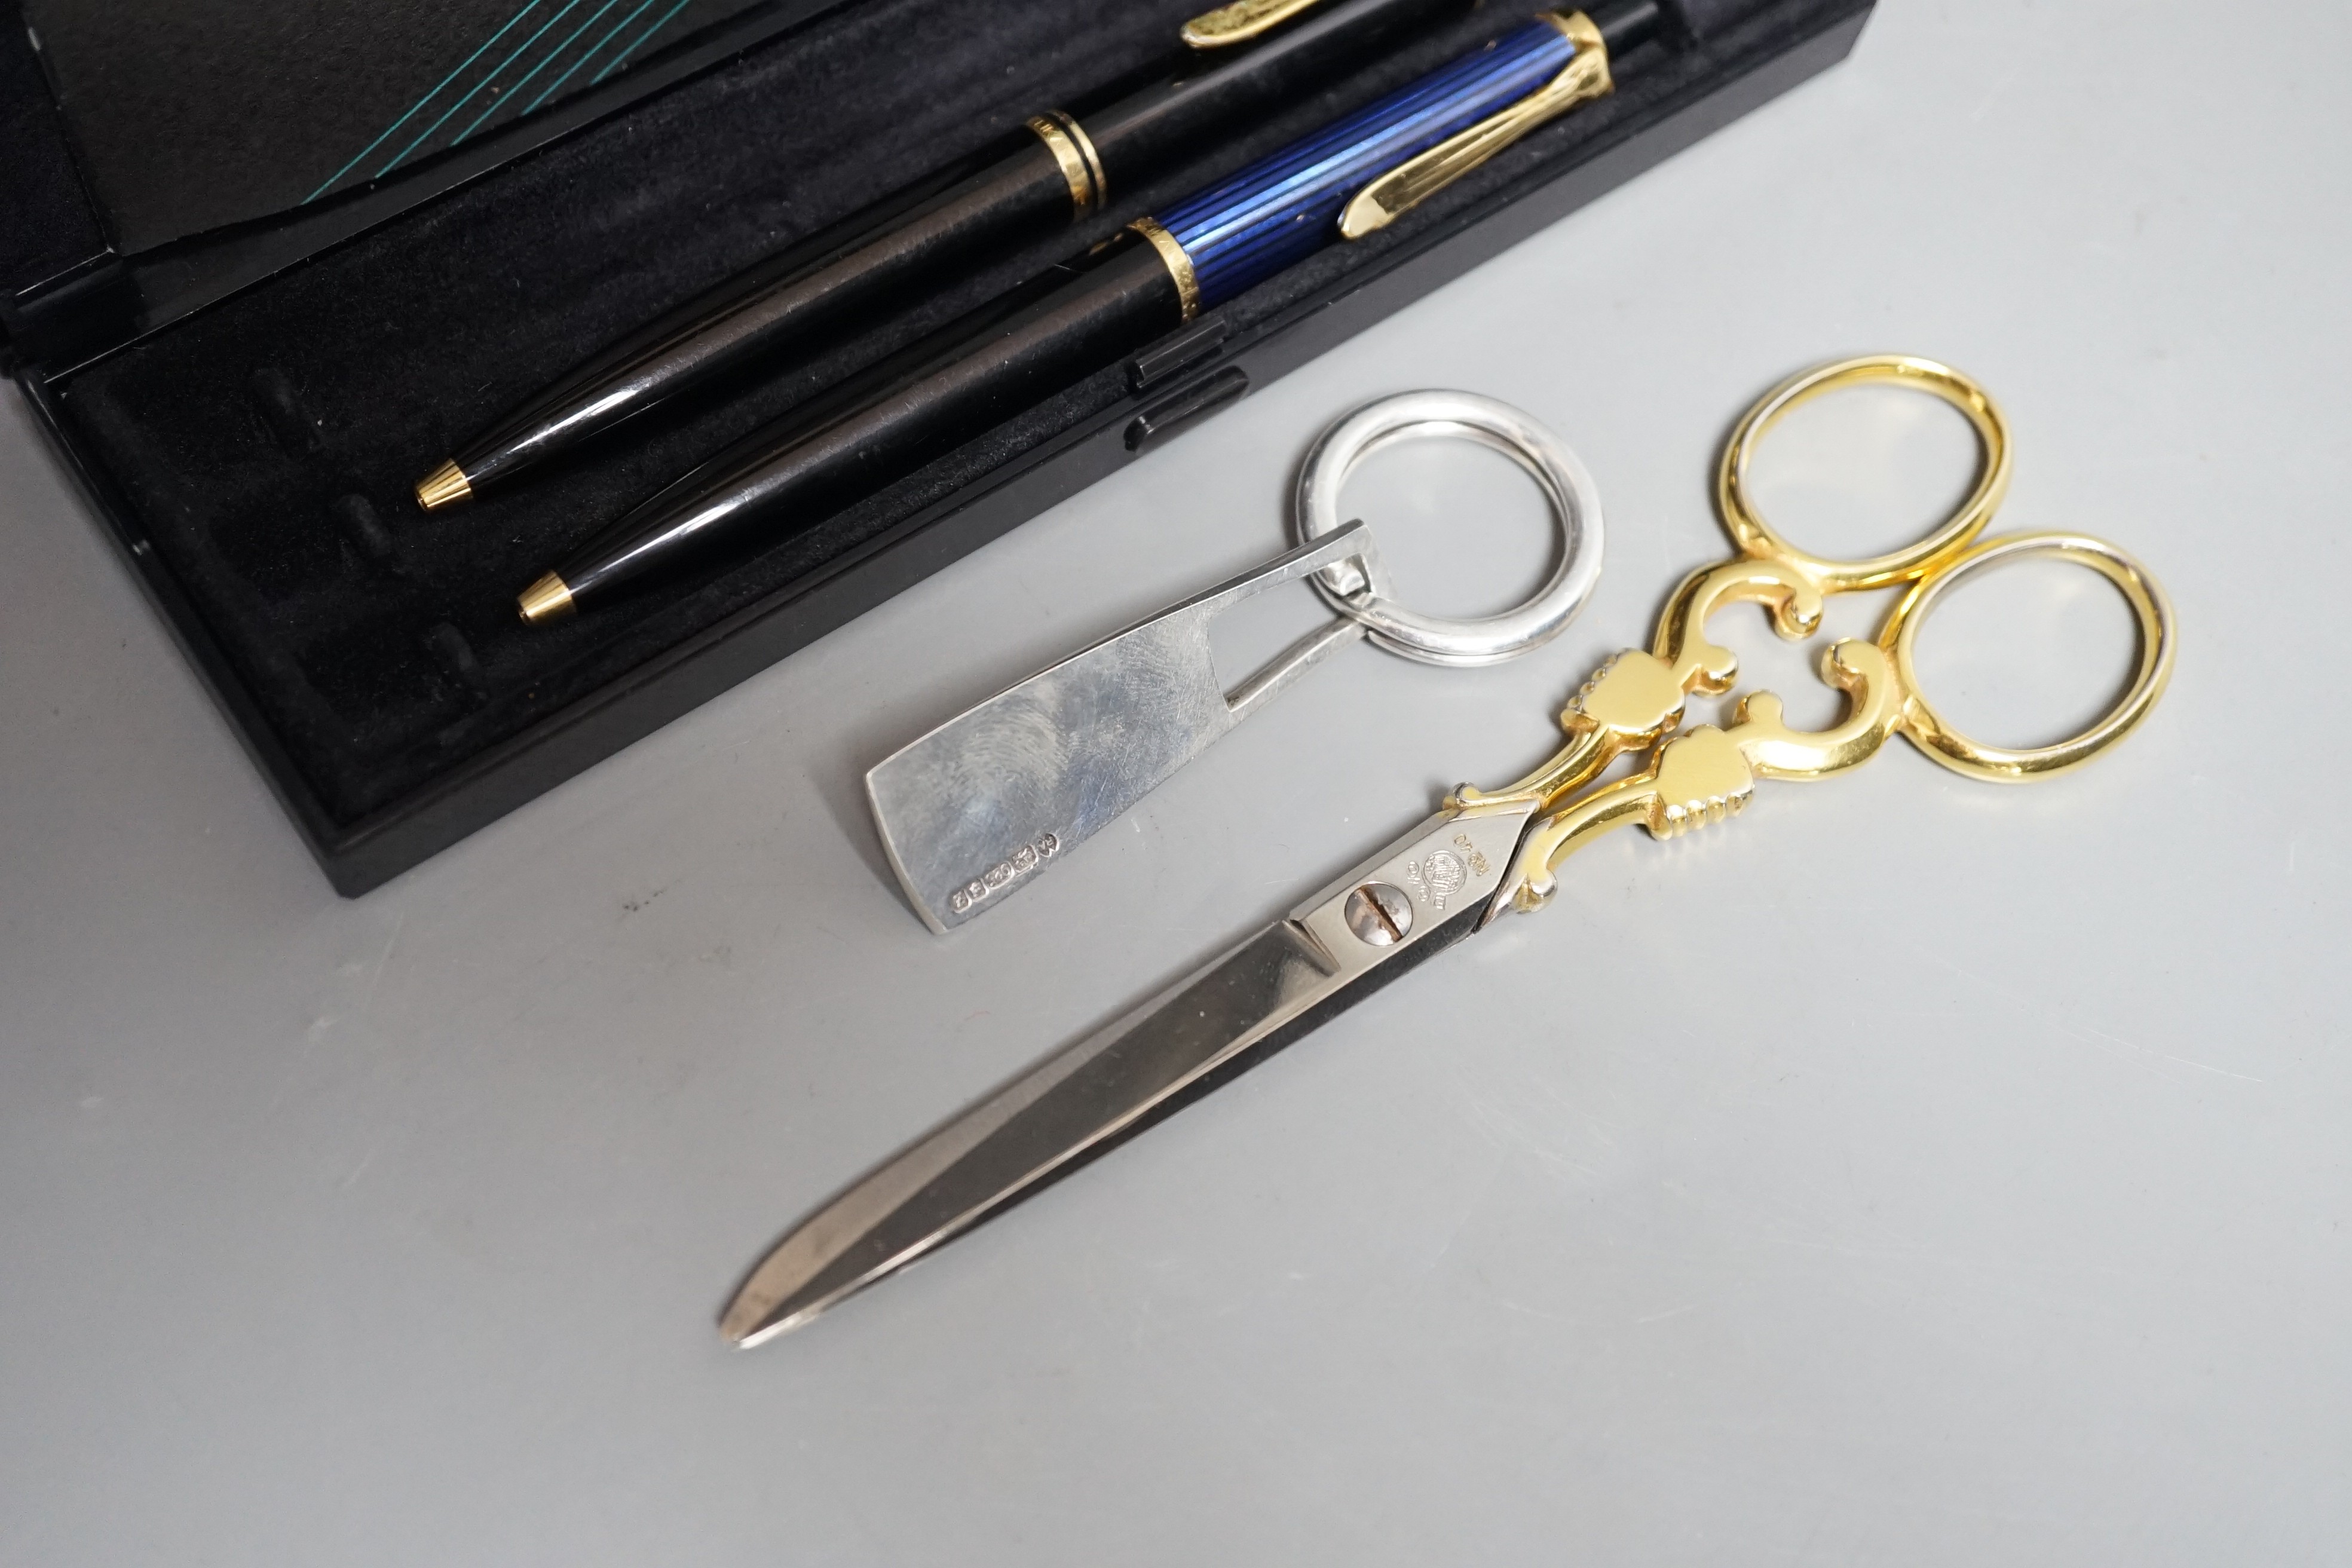 Two Pelikan ballpoint pens boxed with guarantee, 1996, a pair of Solingen scissors and a silver key ring 1999